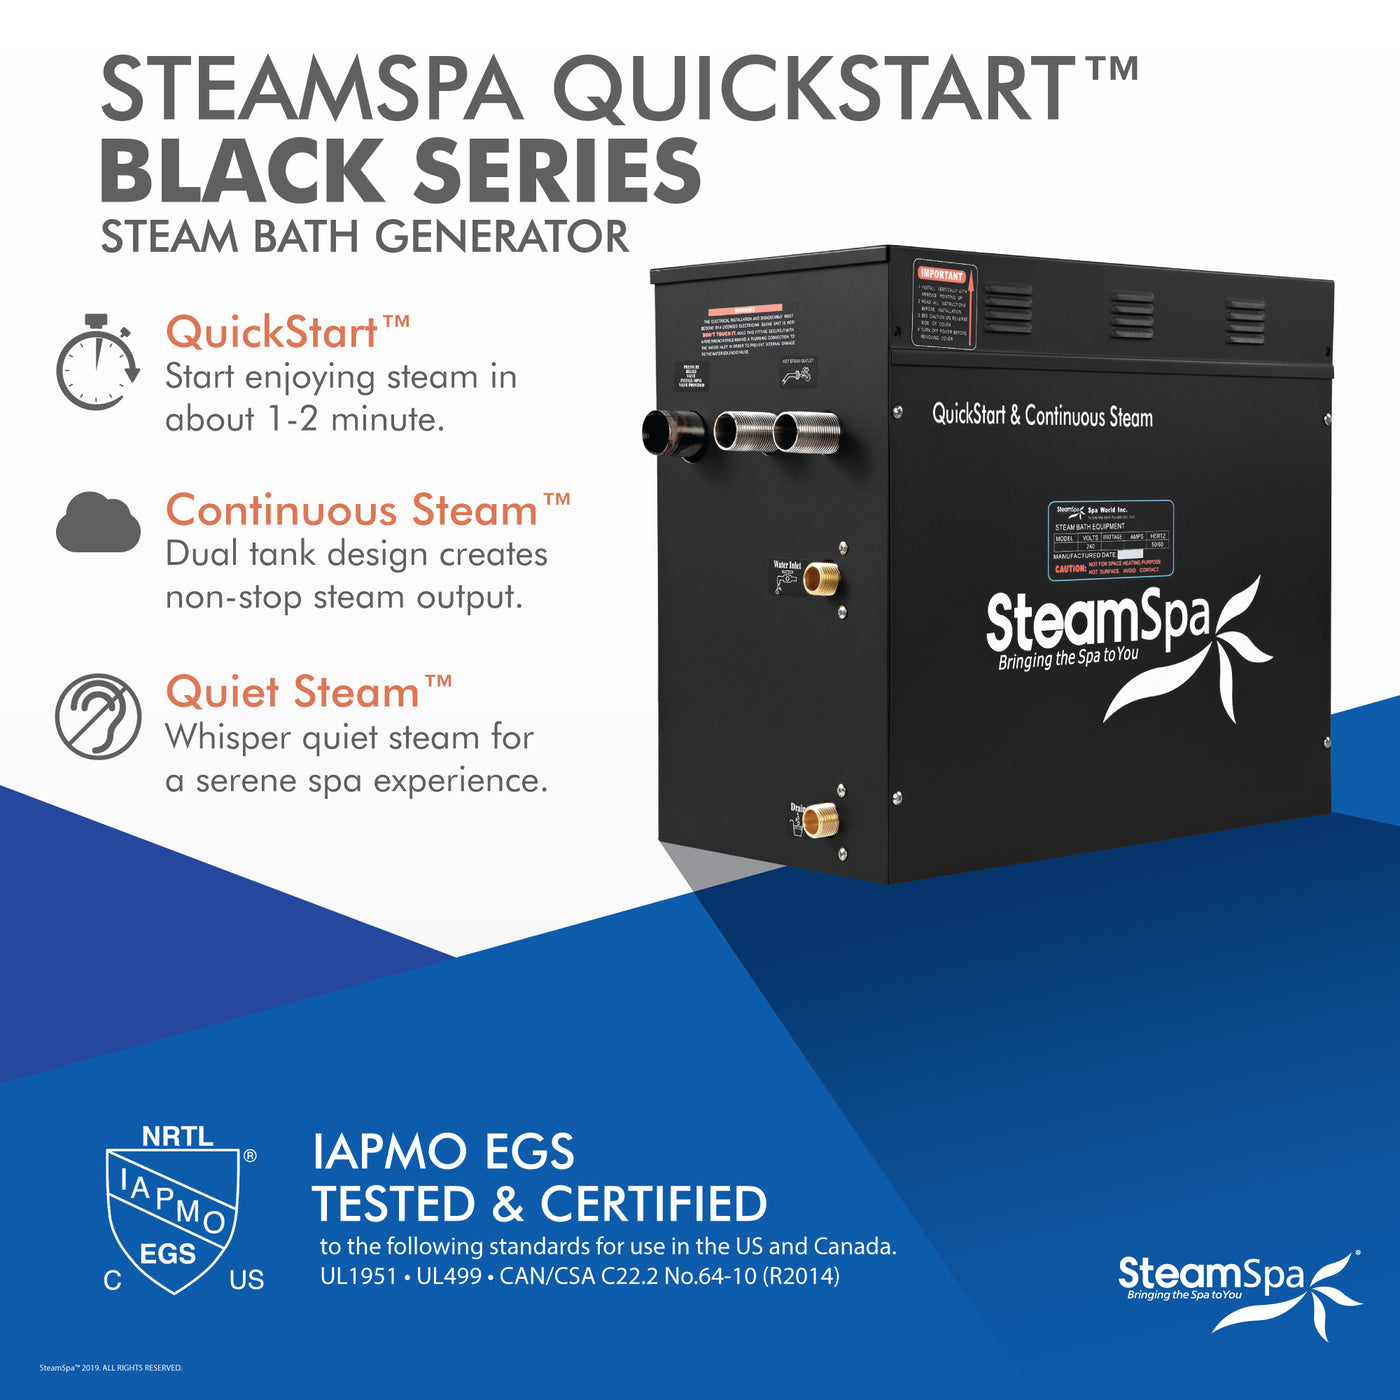 Black Series WiFi and Bluetooth 2 x 10.5kW QuickStart Steam Bath Generator Package with Dual Aroma Pump in Gold BKT2100GD-ADP